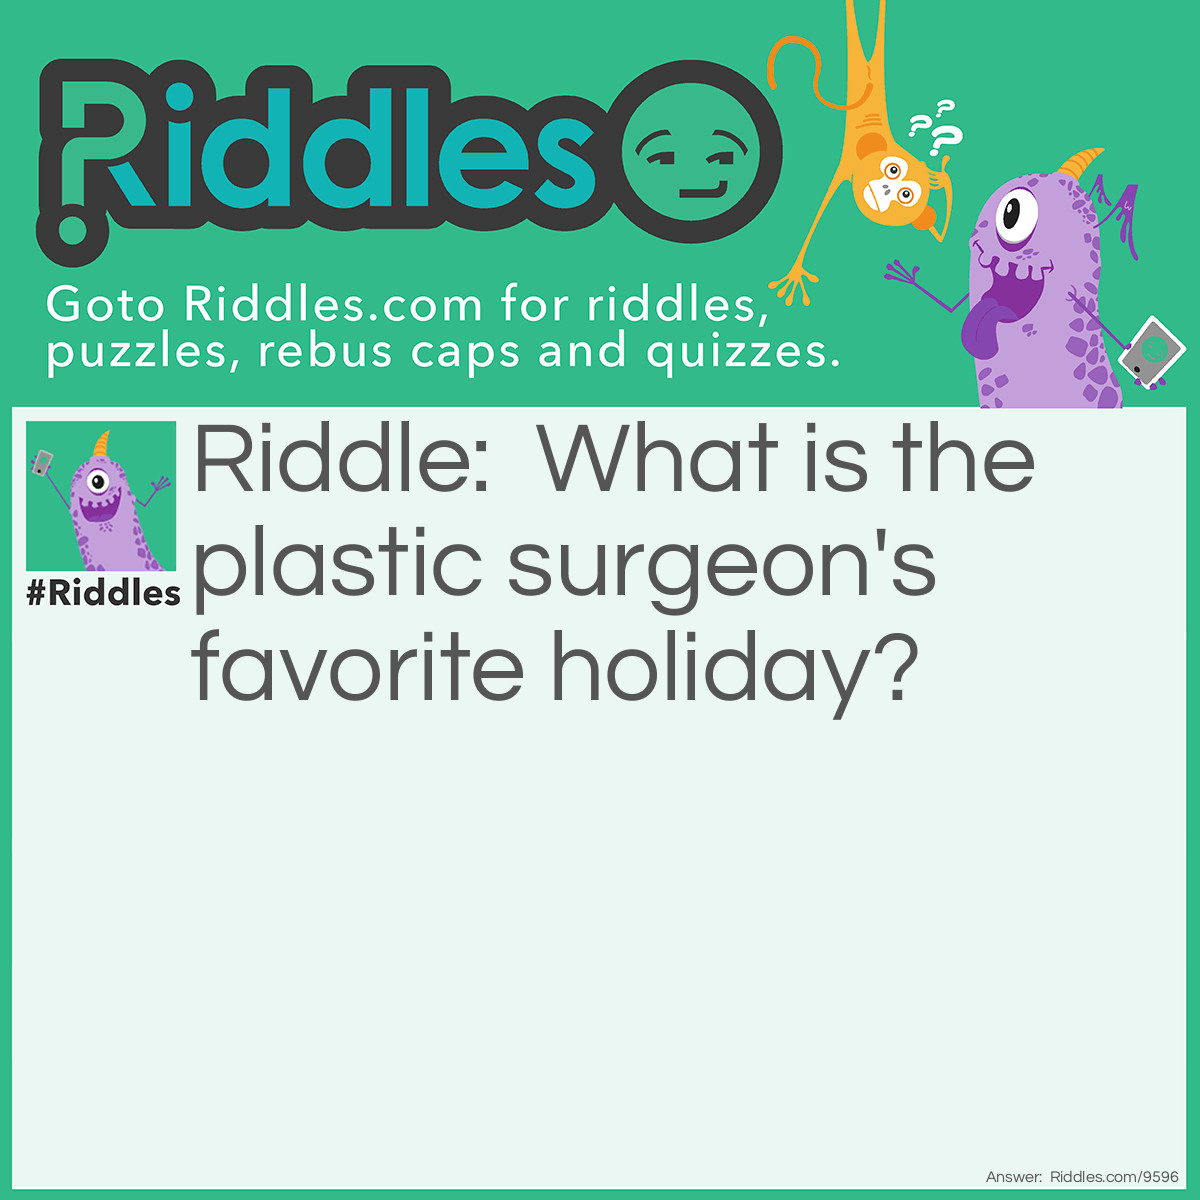 Riddle: What is the plastic surgeon's favorite holiday? Answer: New Ears!